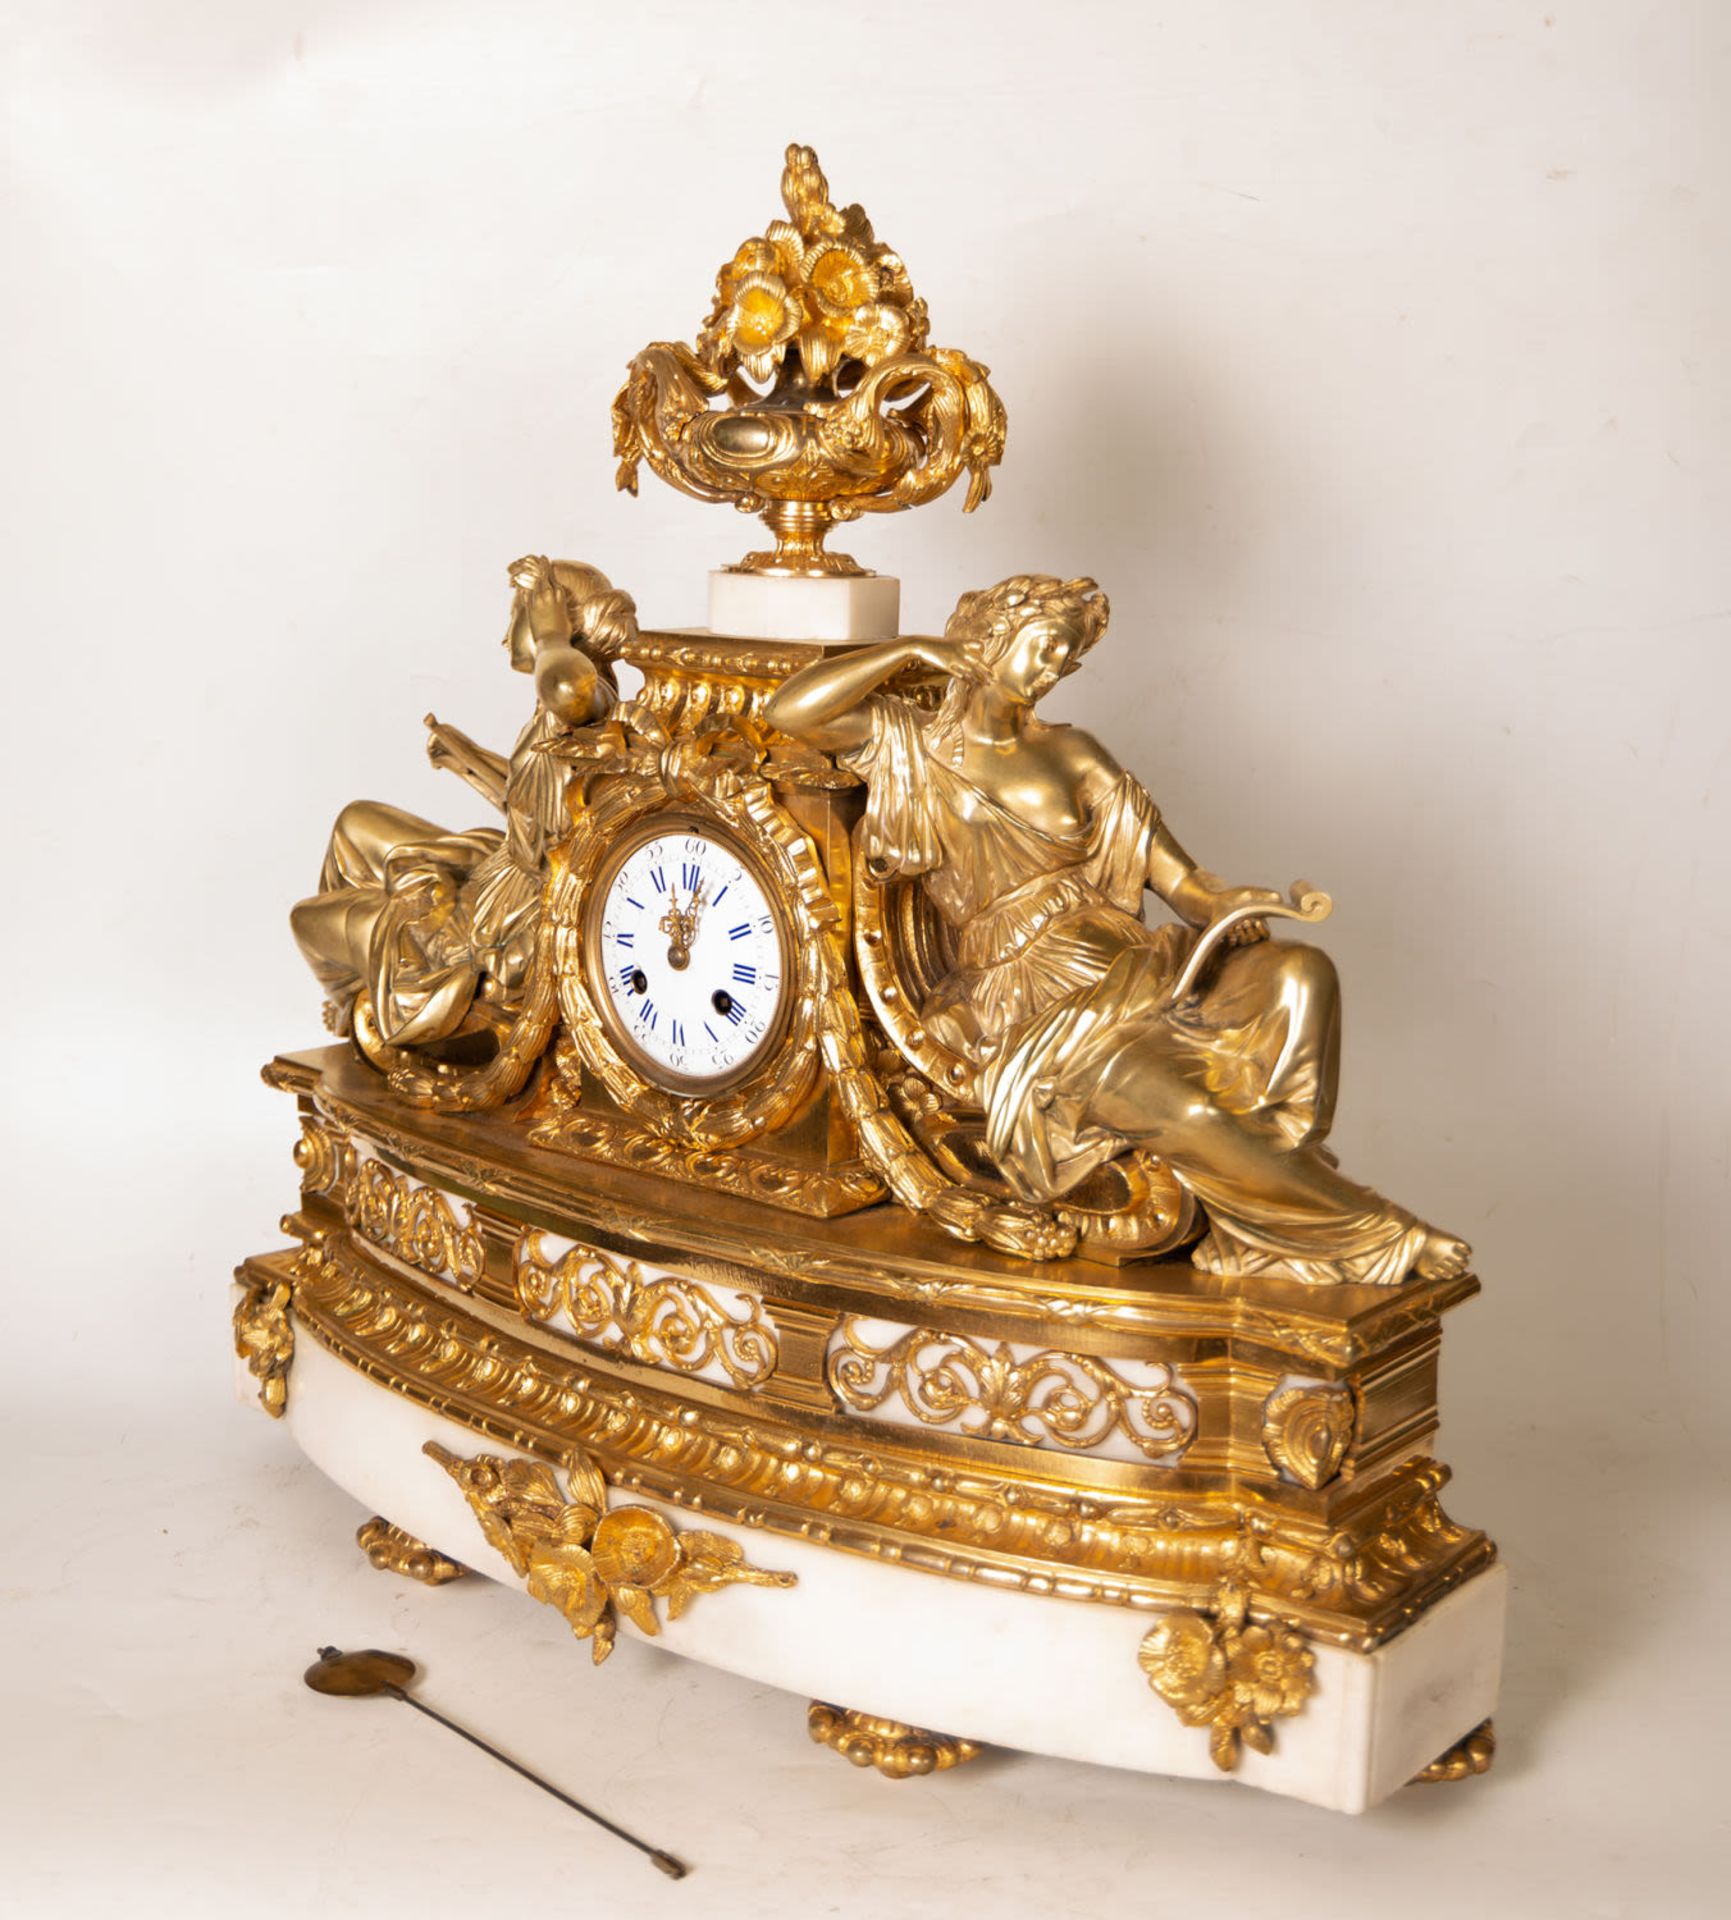 Large three-piece Garniture clock with pair of cherub candlesticks in Marble and gilt bronze, France - Image 4 of 11